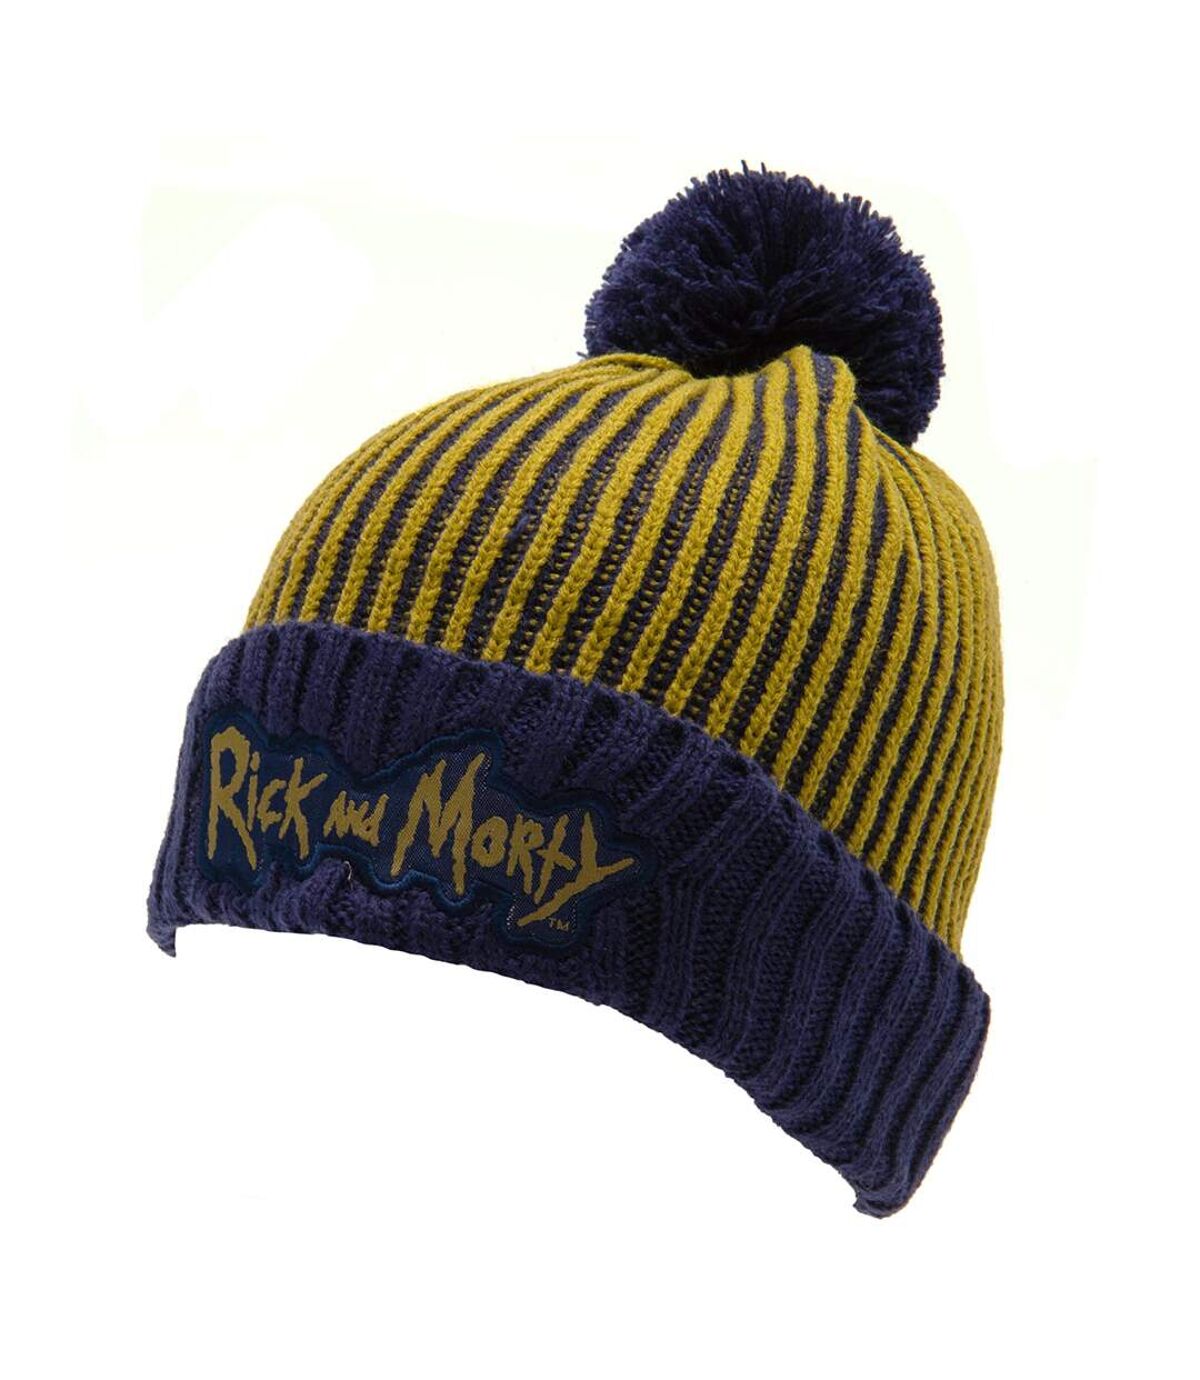 Rick And Morty Tricot Bobble Beanie (Blue/Yellow)